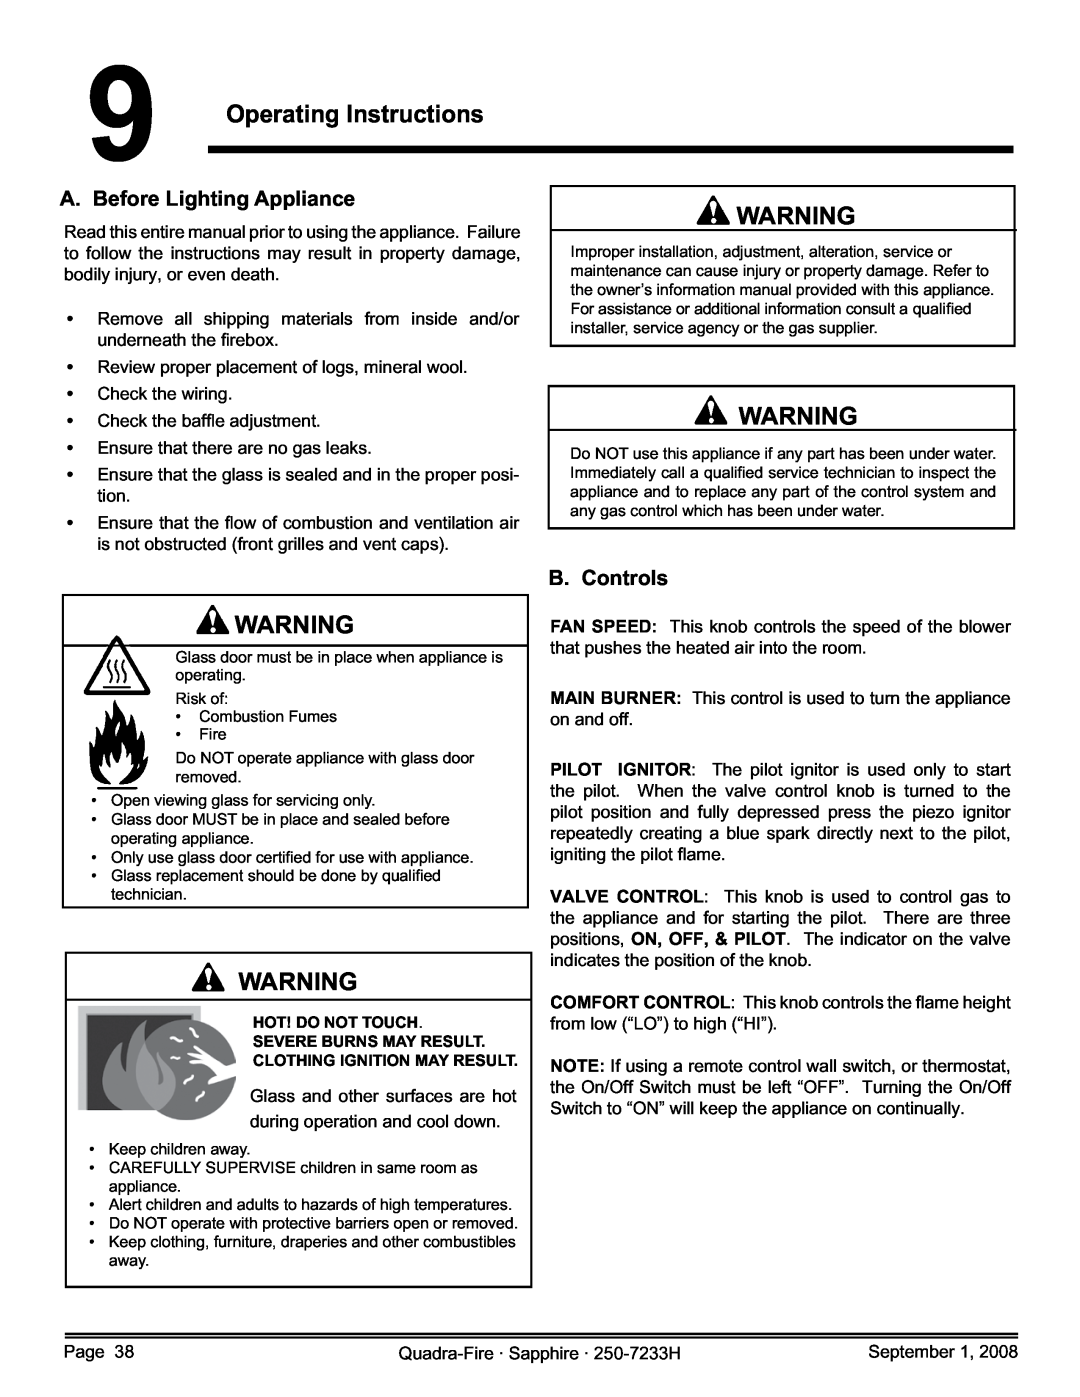 Hearth and Home Technologies SAPPH-D-CWL, 839-1390 Operating Instructions, A. Before Lighting Appliance, B. Controls 